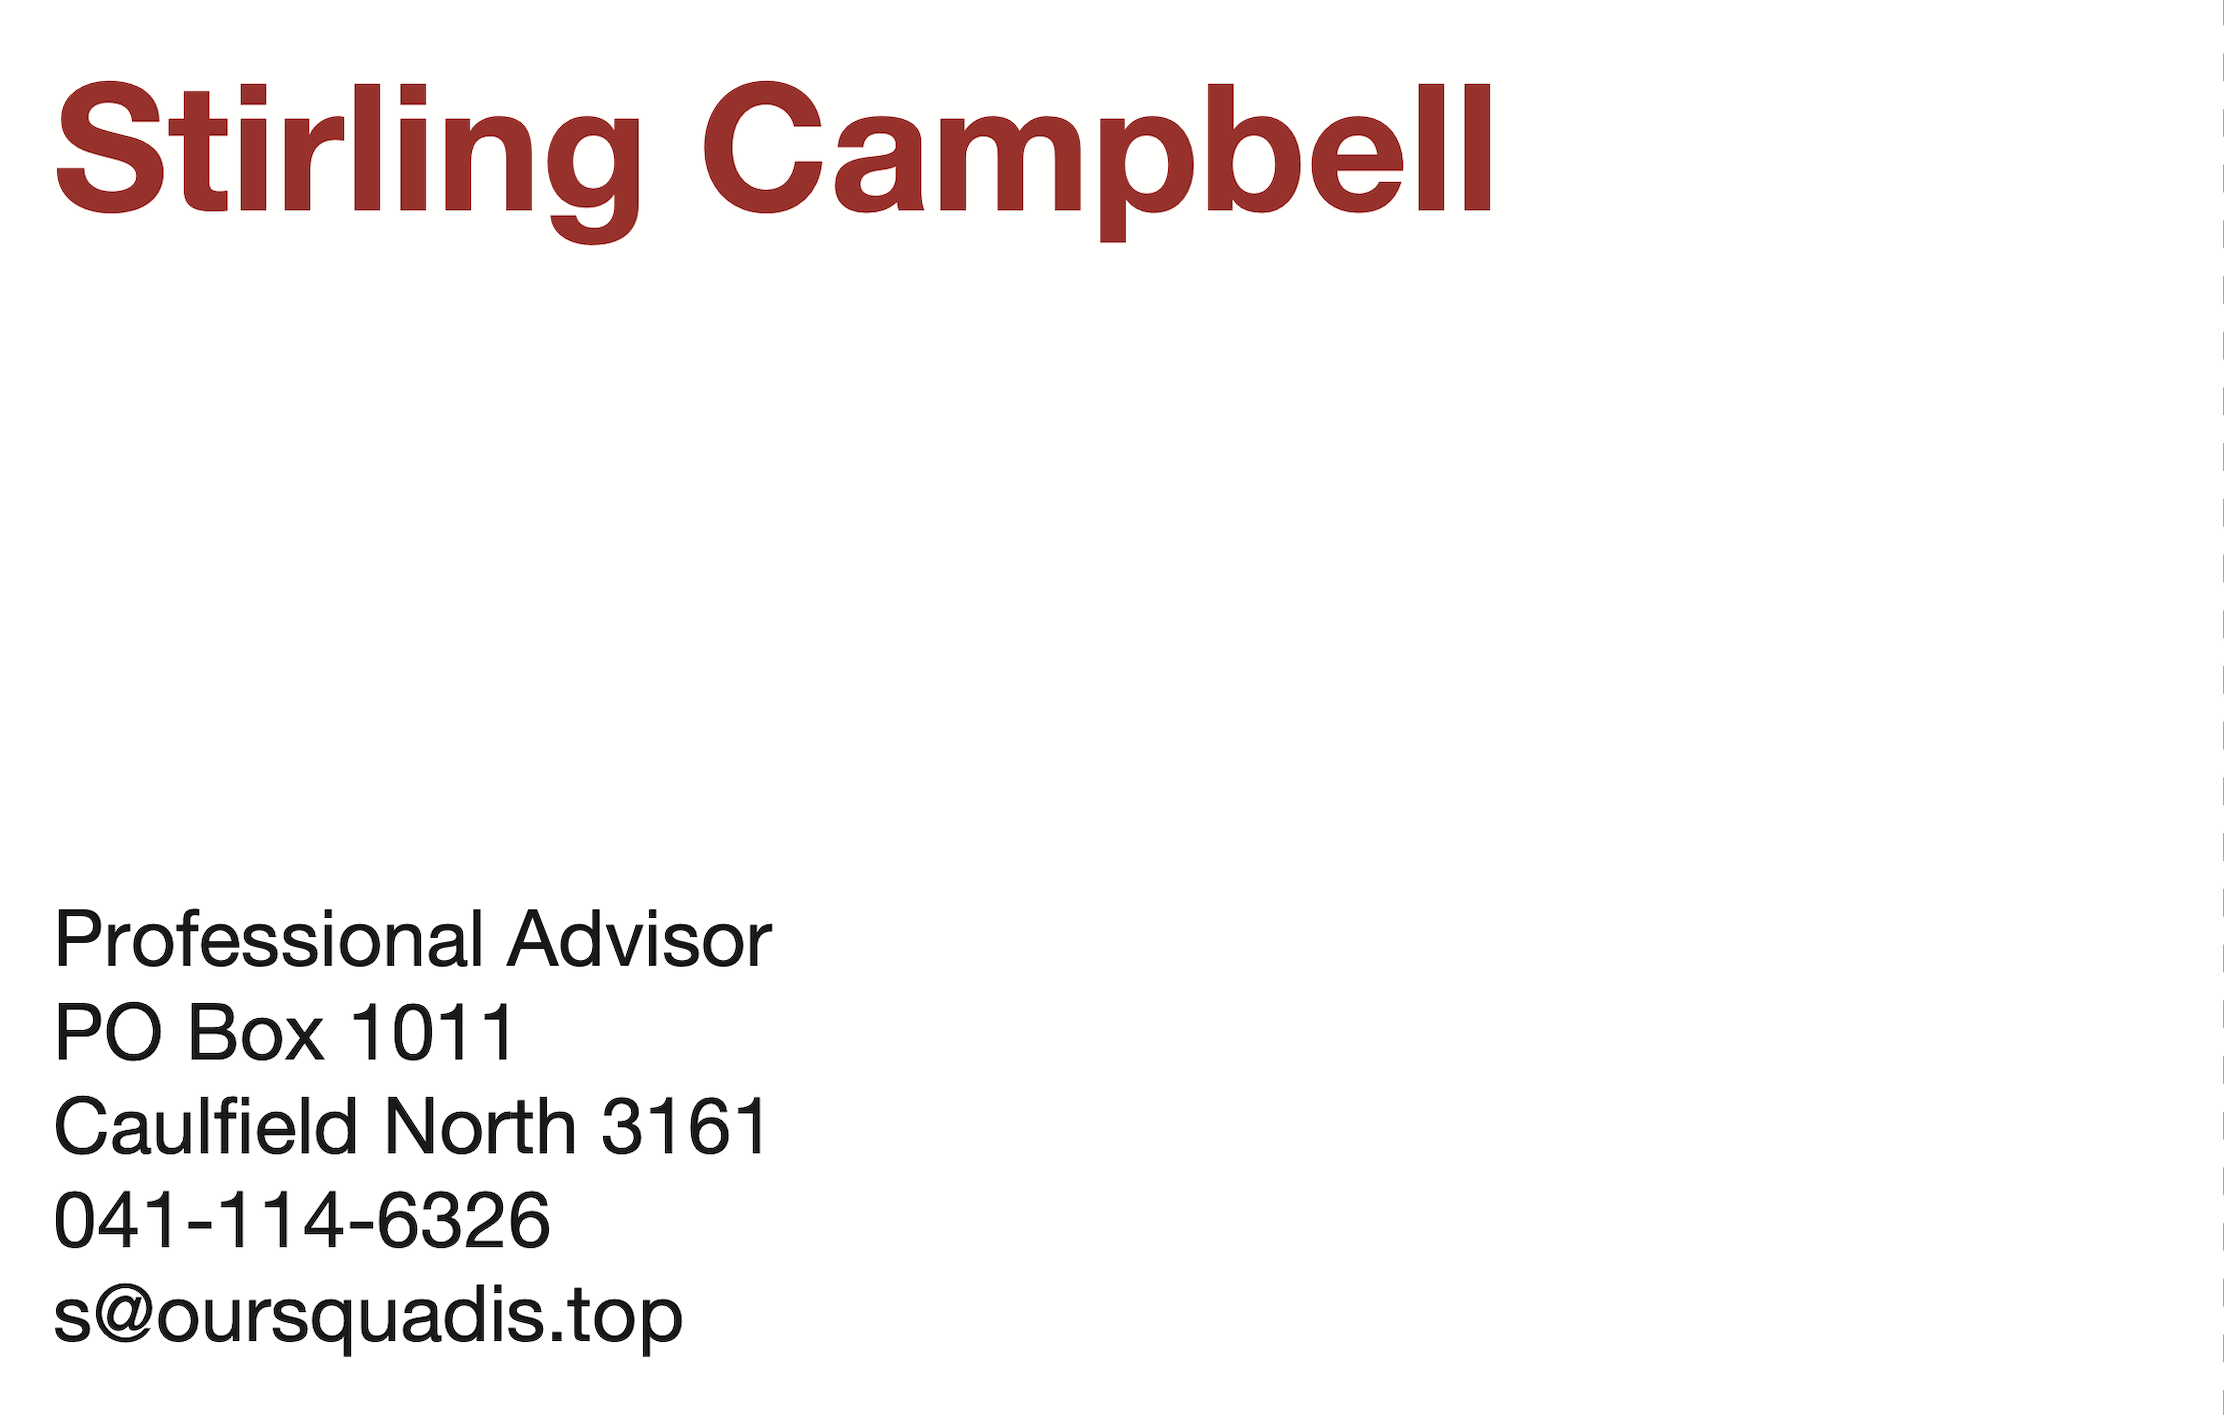 Stirling Campbell